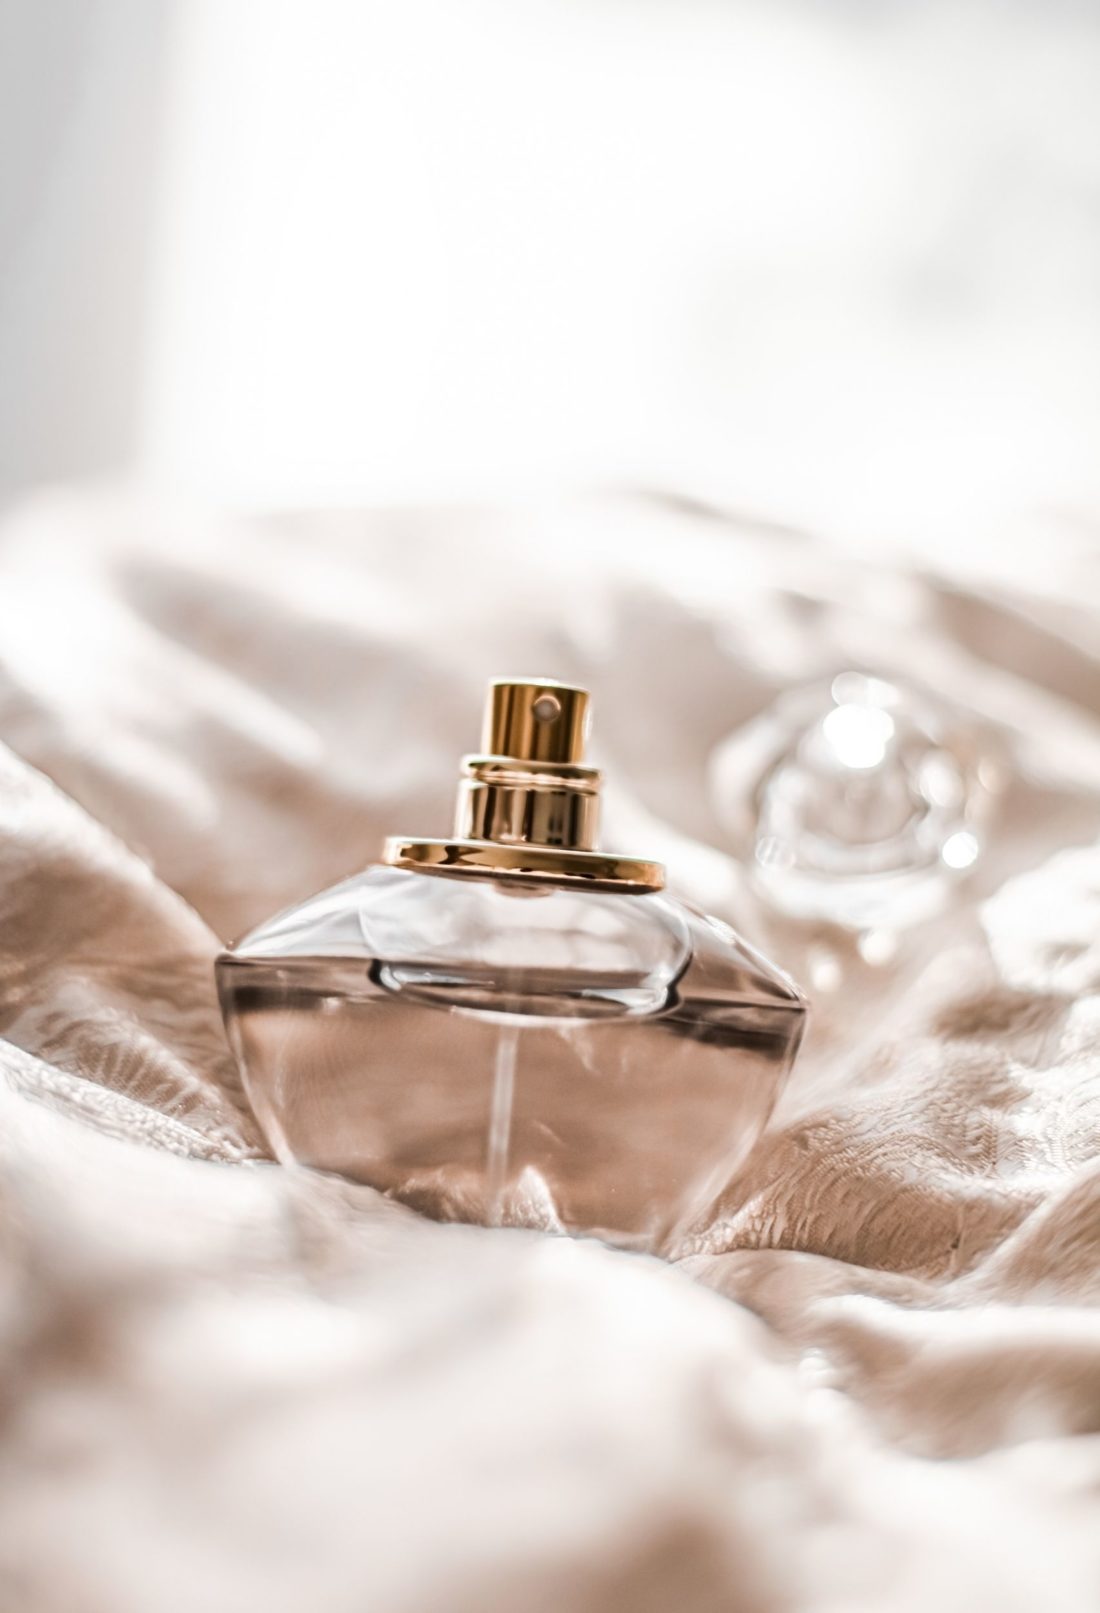 What Are Fragrance Notes and What Do They Mean?